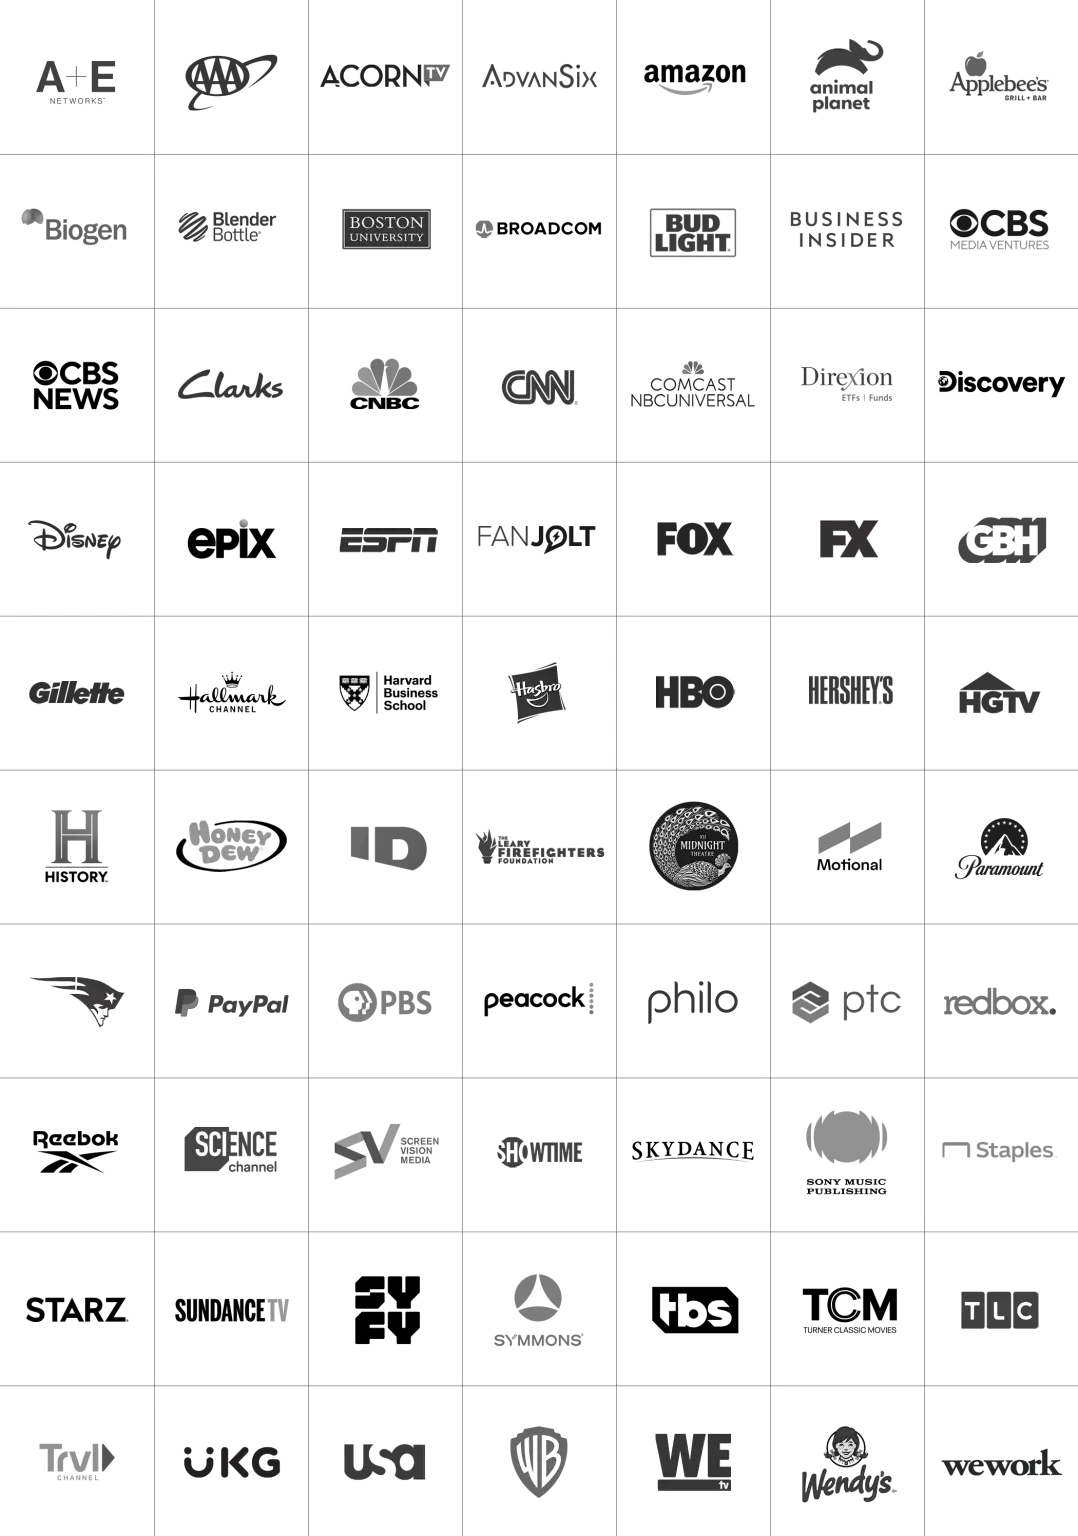 A black and white image of many different product logos.